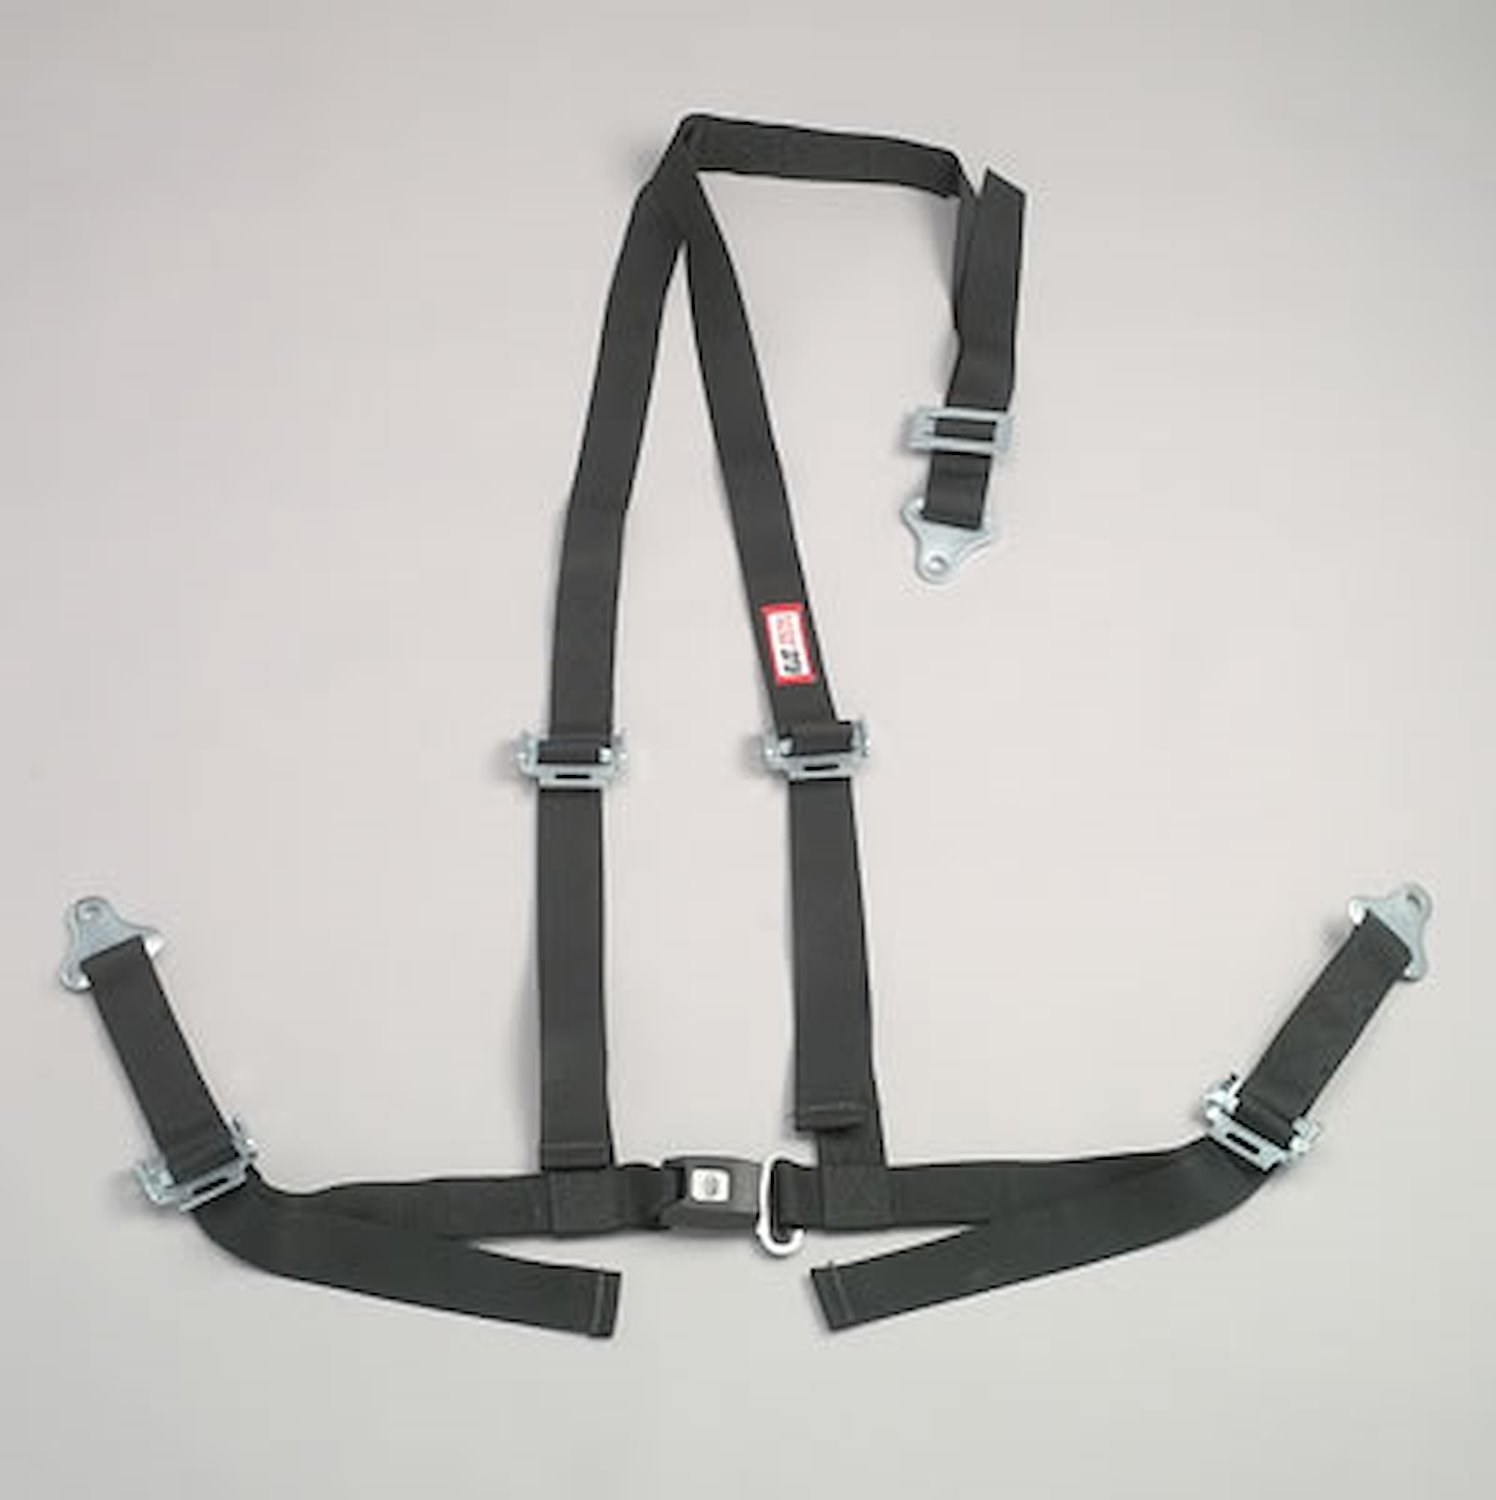 NON-SFI B&T HARNESS 2 PULL DOWN Lap Belt 2 S. H. V ROLL BAR Mount ALL BOLT ENDS w/STERNUM STRAP GRAY